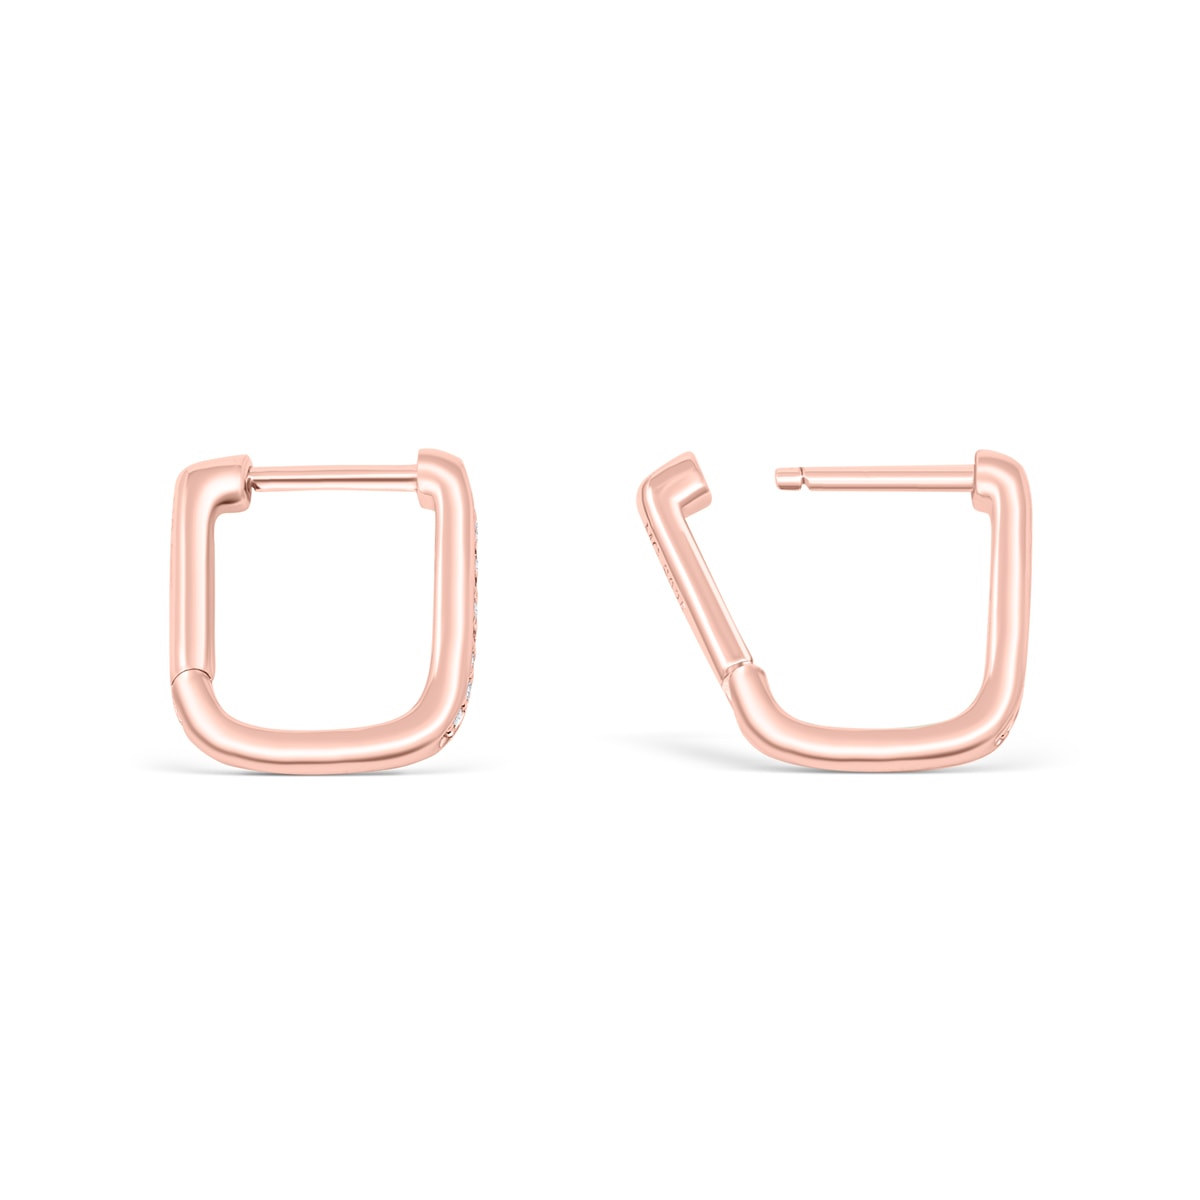 Small unique rose gold earrings